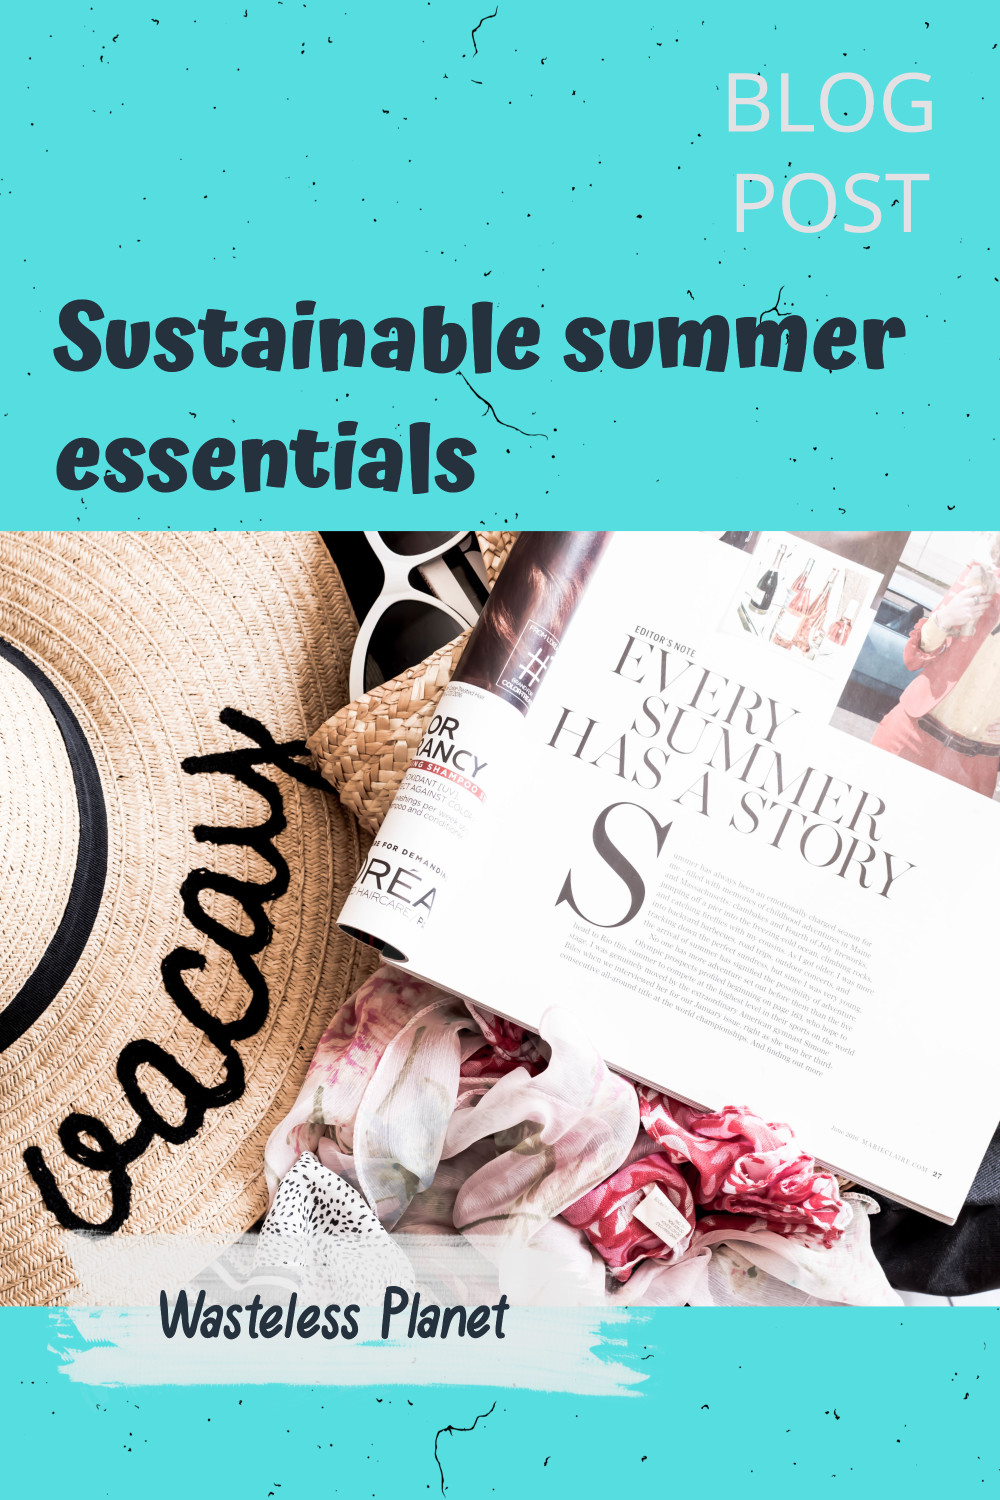 Sustainable summer essentials you need and love